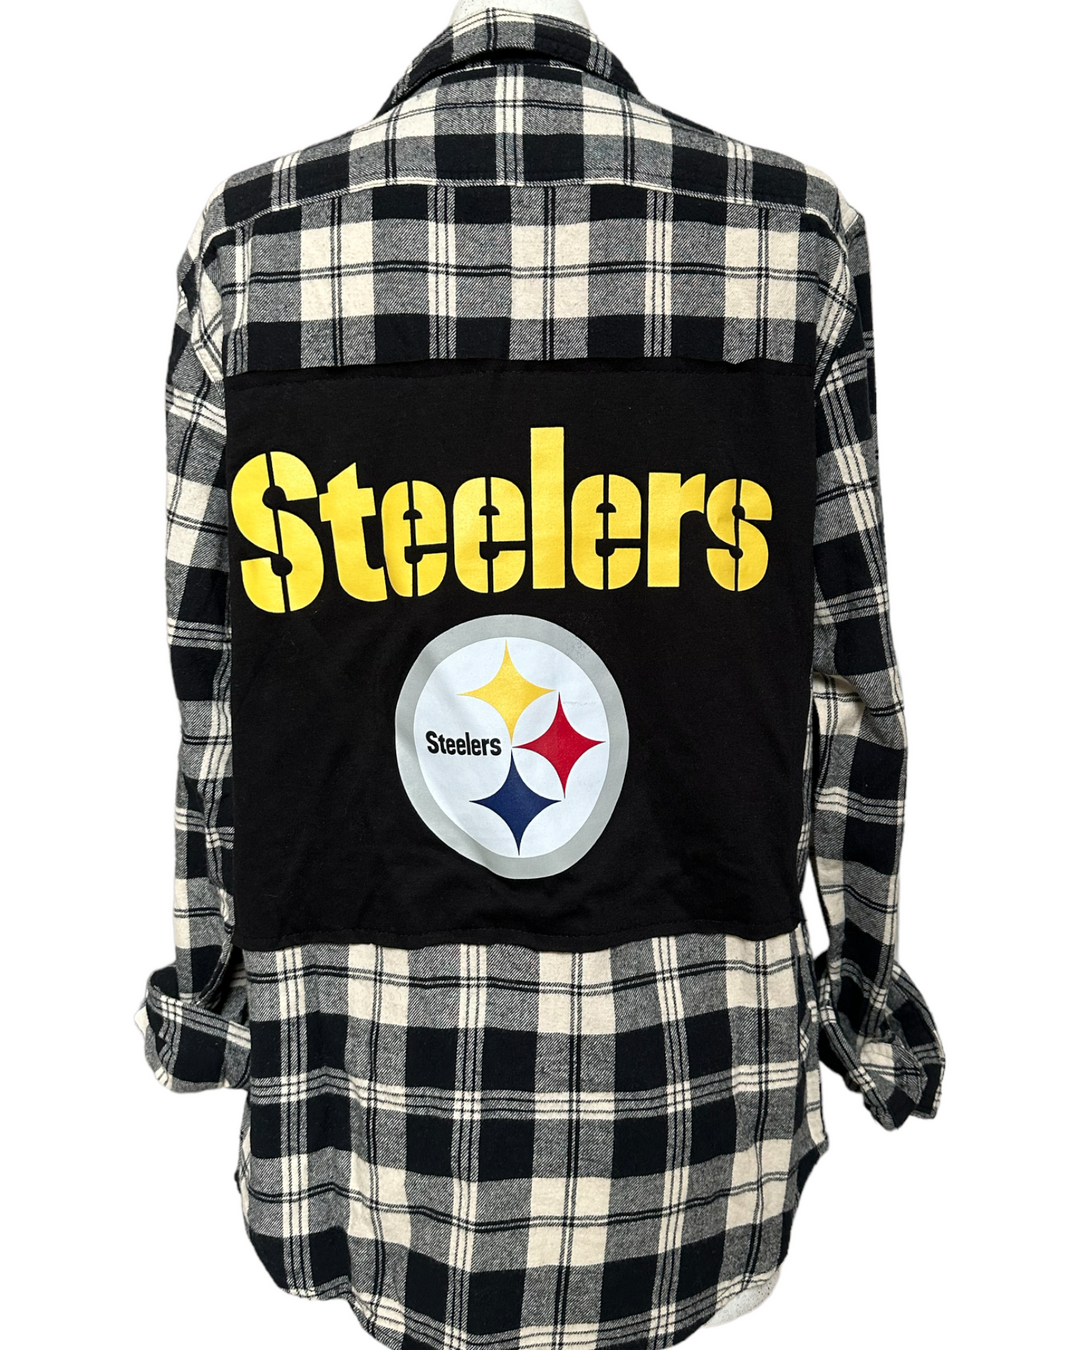 Steelers Patched Flannel